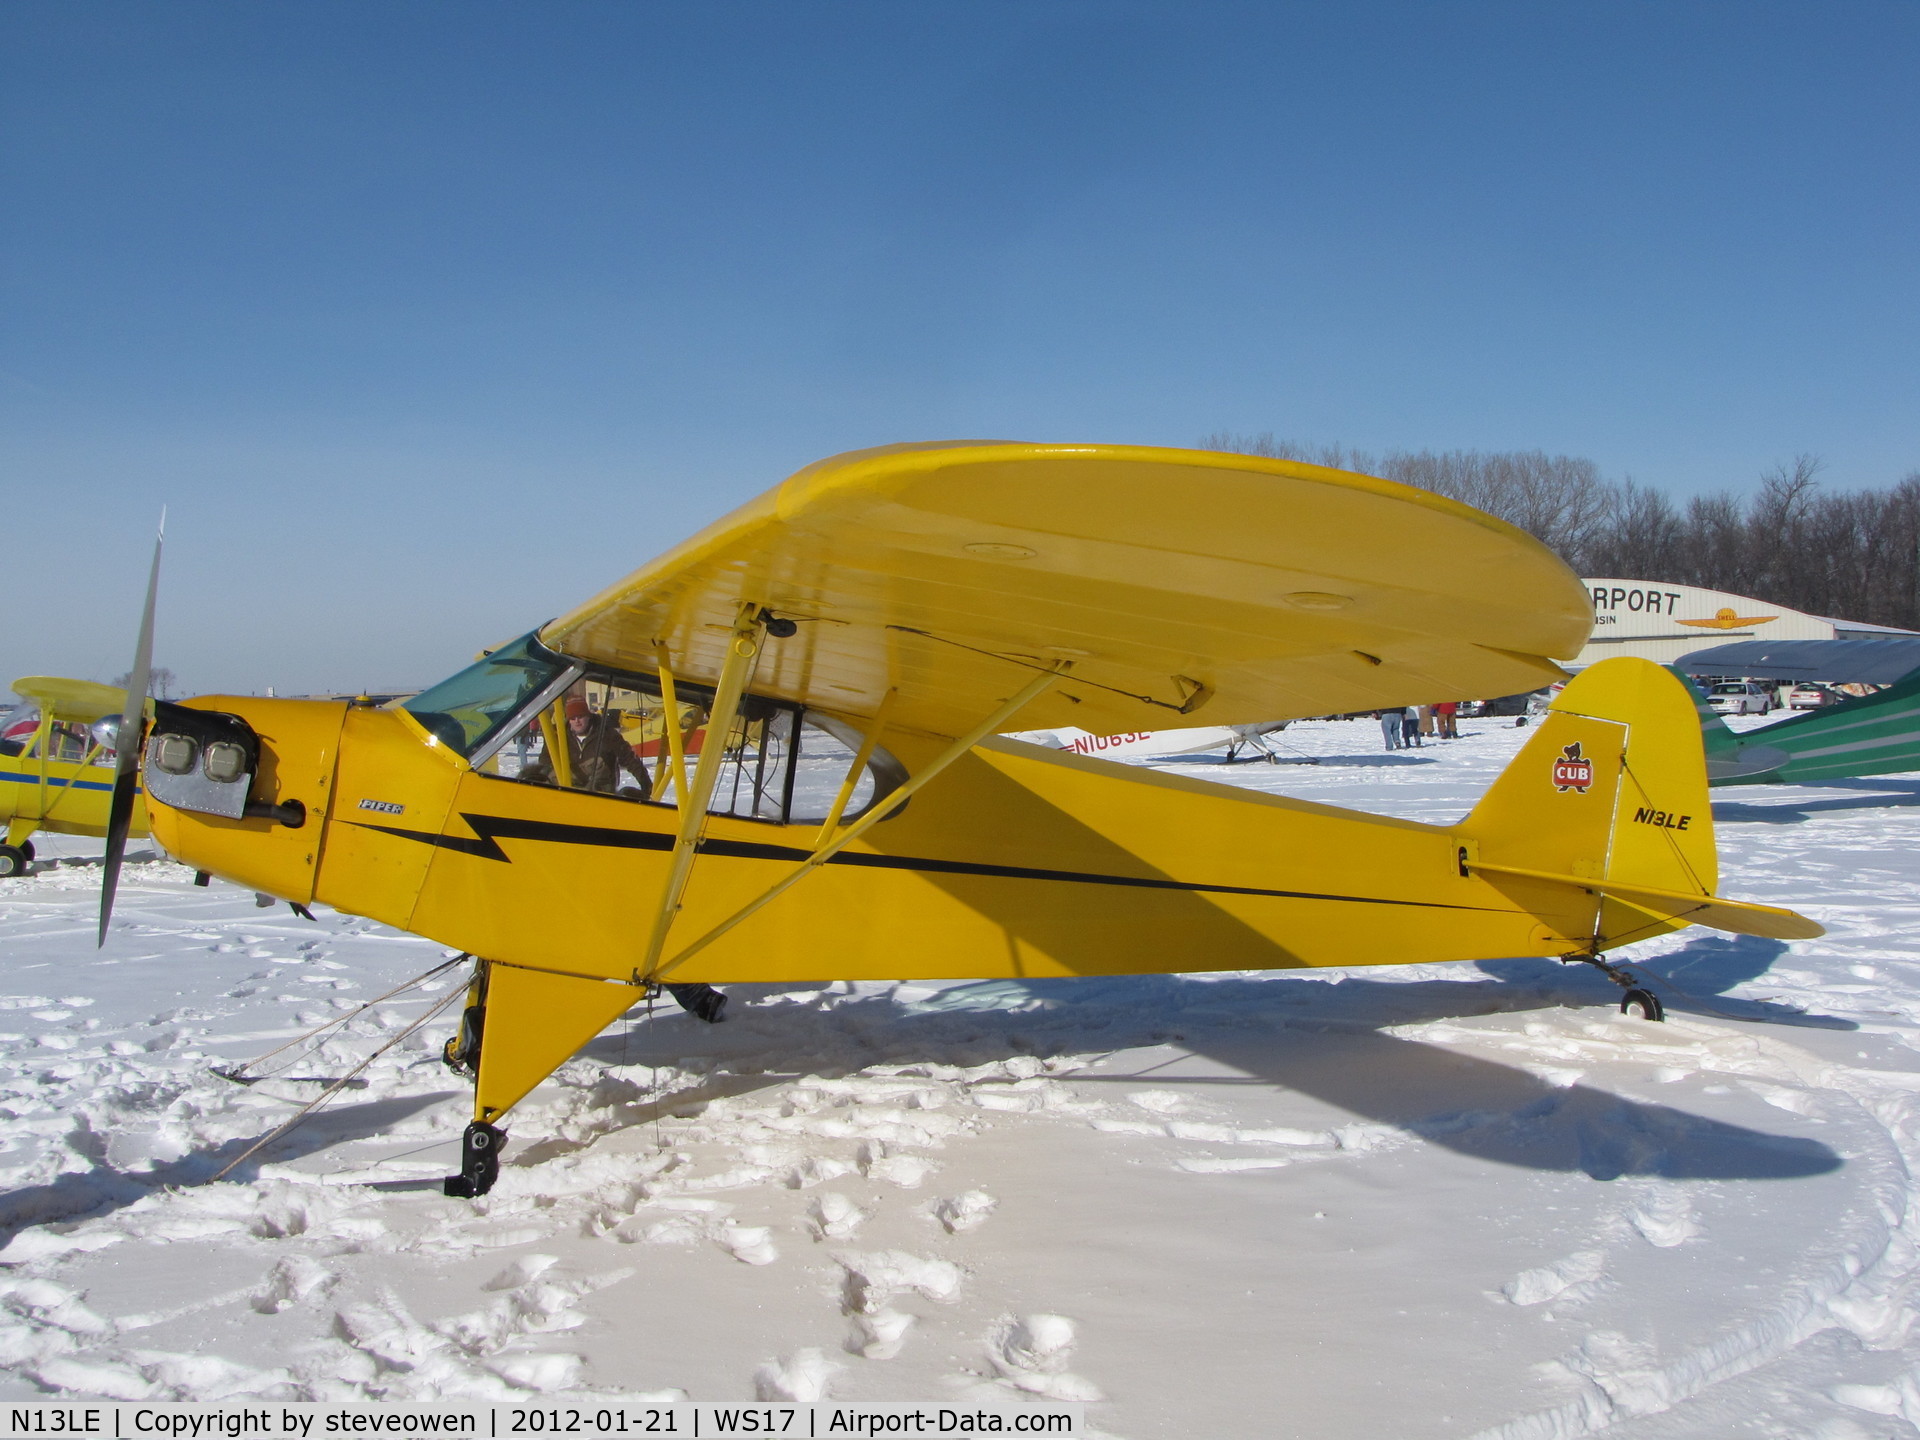 N13LE, Piper J3C-65 Cub Cub C/N 17571, Bright snow and skis make for a good day of fun